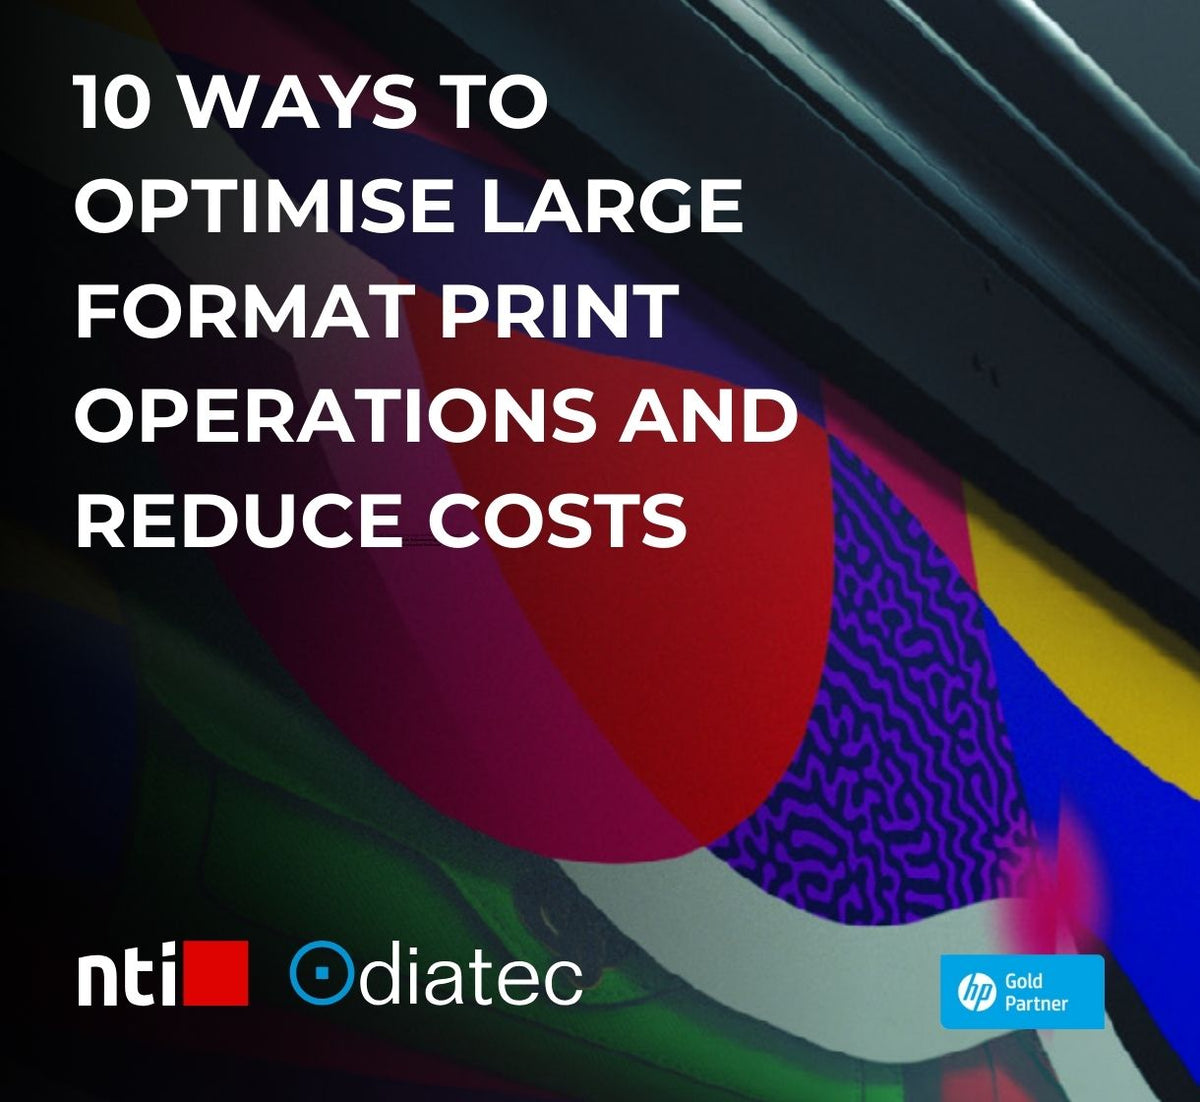 10 Ways to Optimise Large Format Print Operations and Reduce Costs